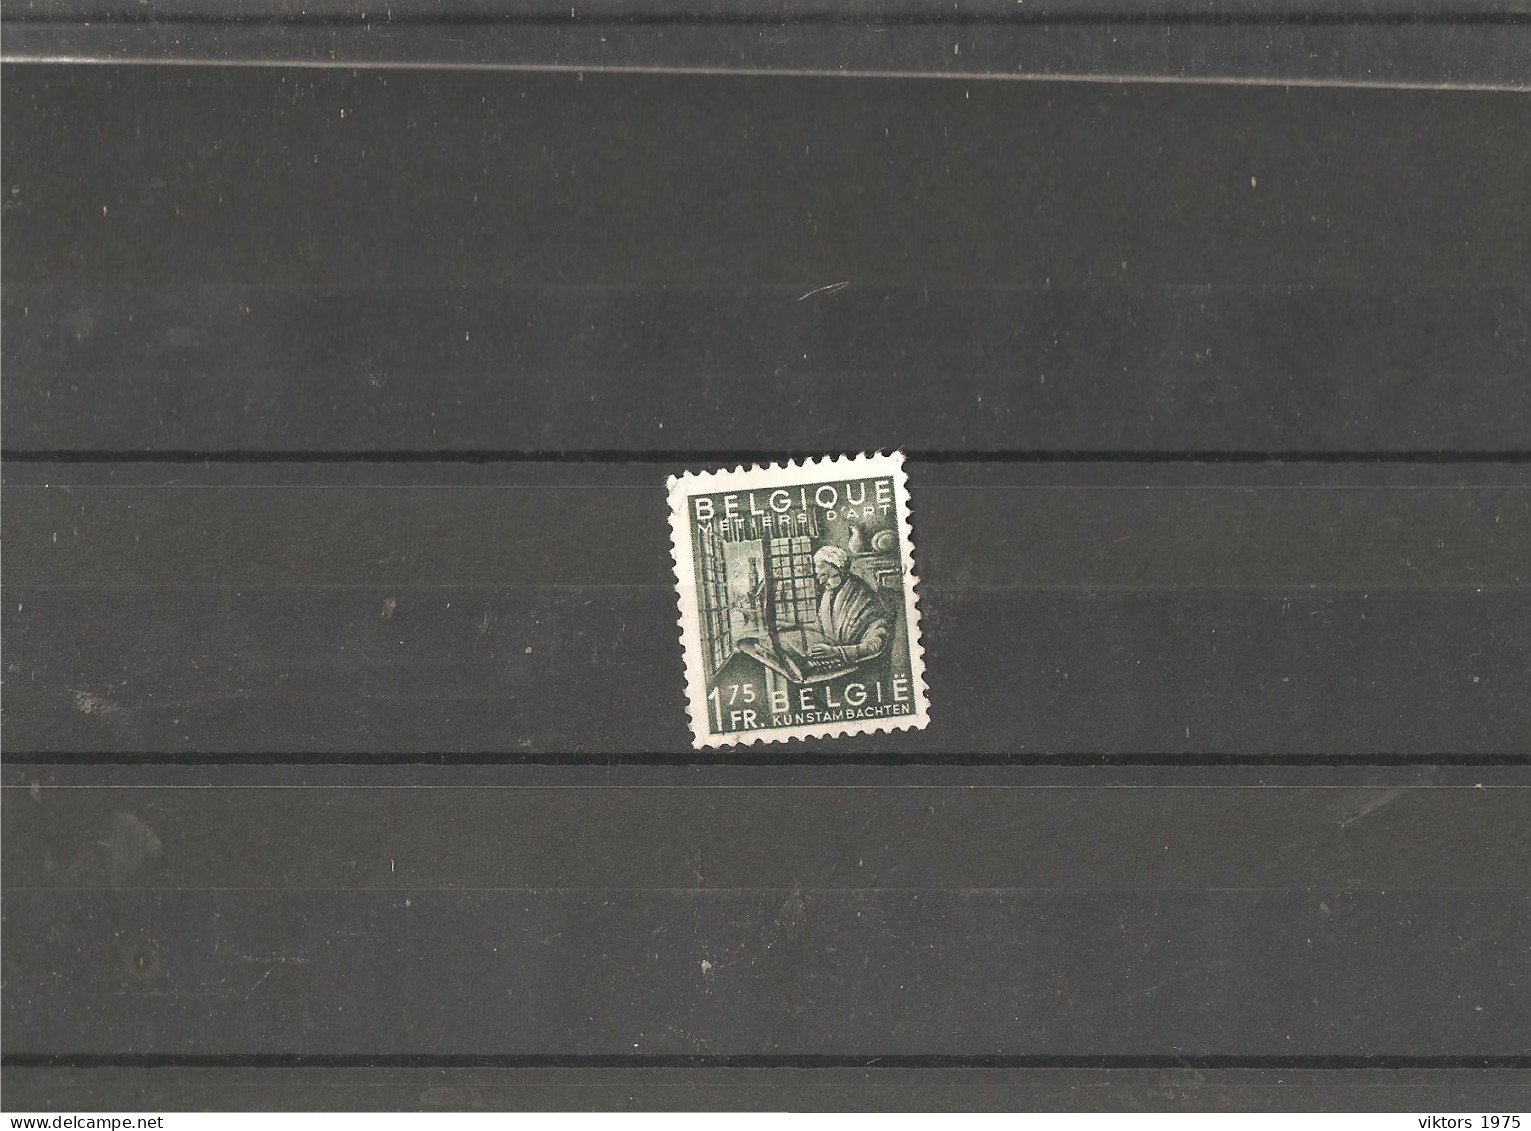 Used Stamp Nr.808 In MICHEL Catalog - Used Stamps